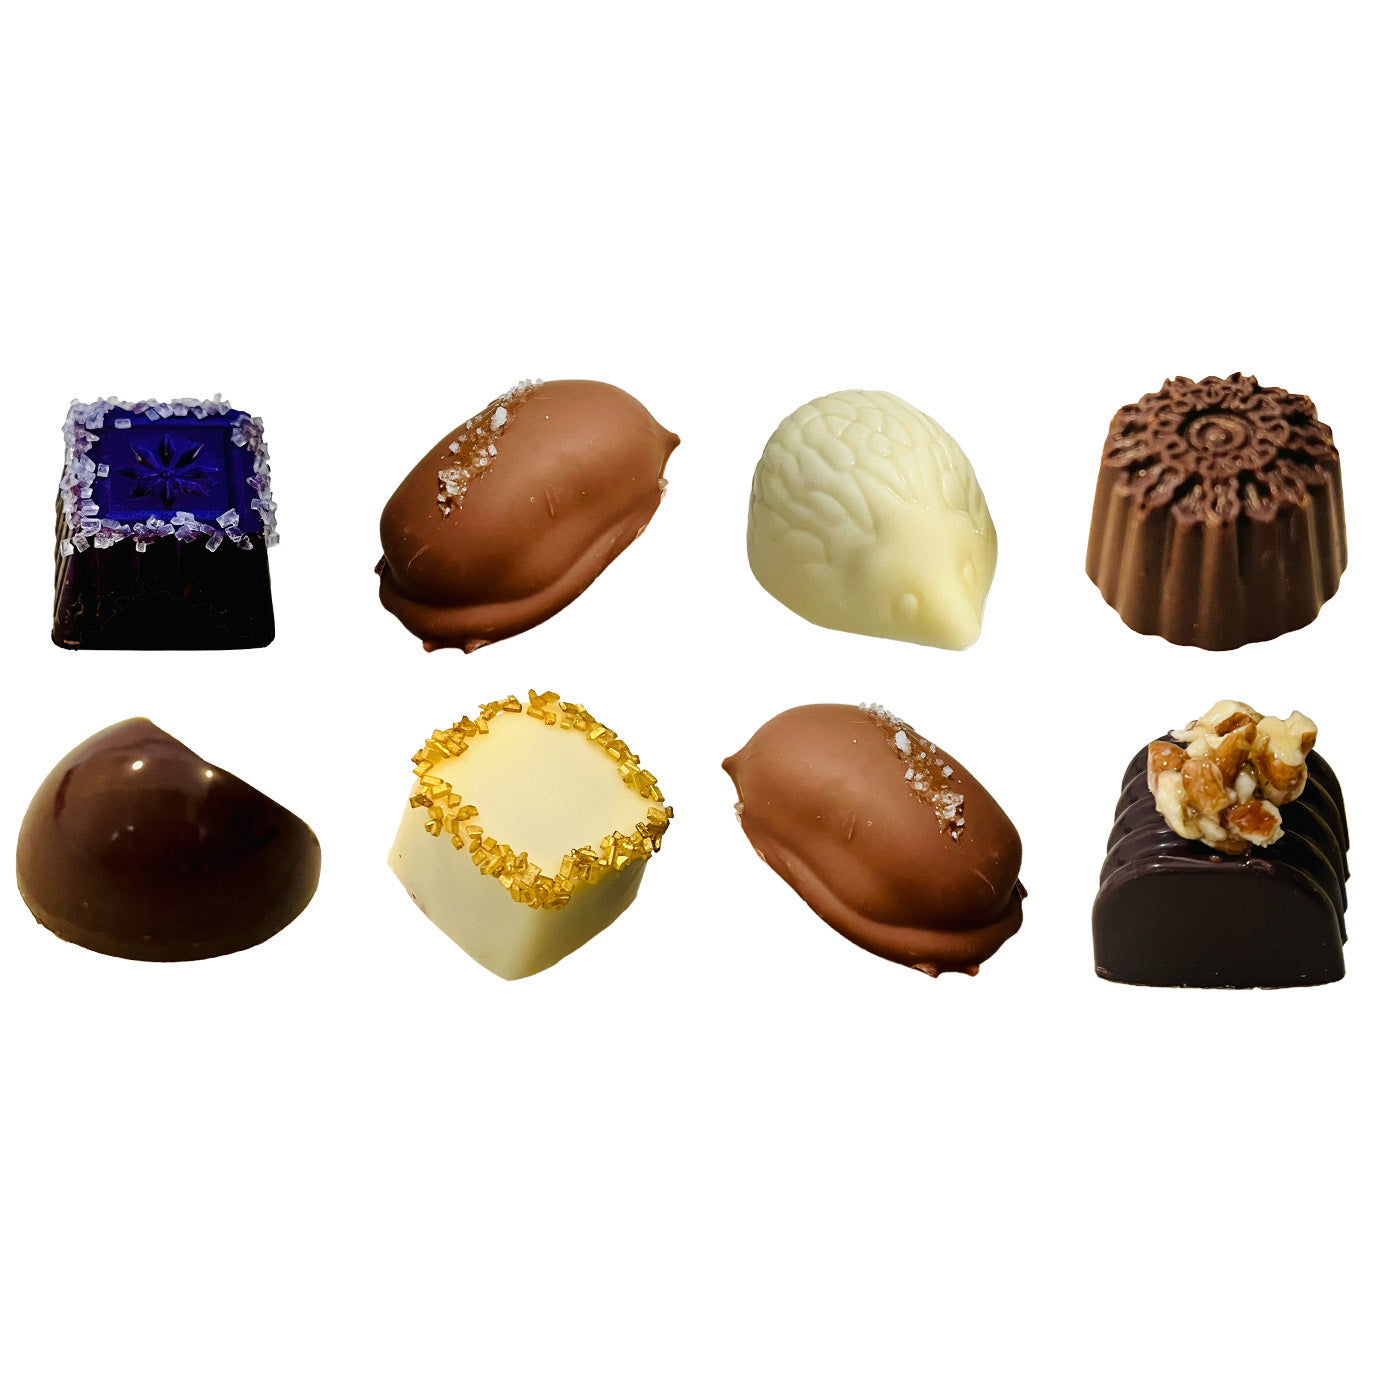 2. Ambrosia Confections - Summer Collection, Chocolatier's Eight